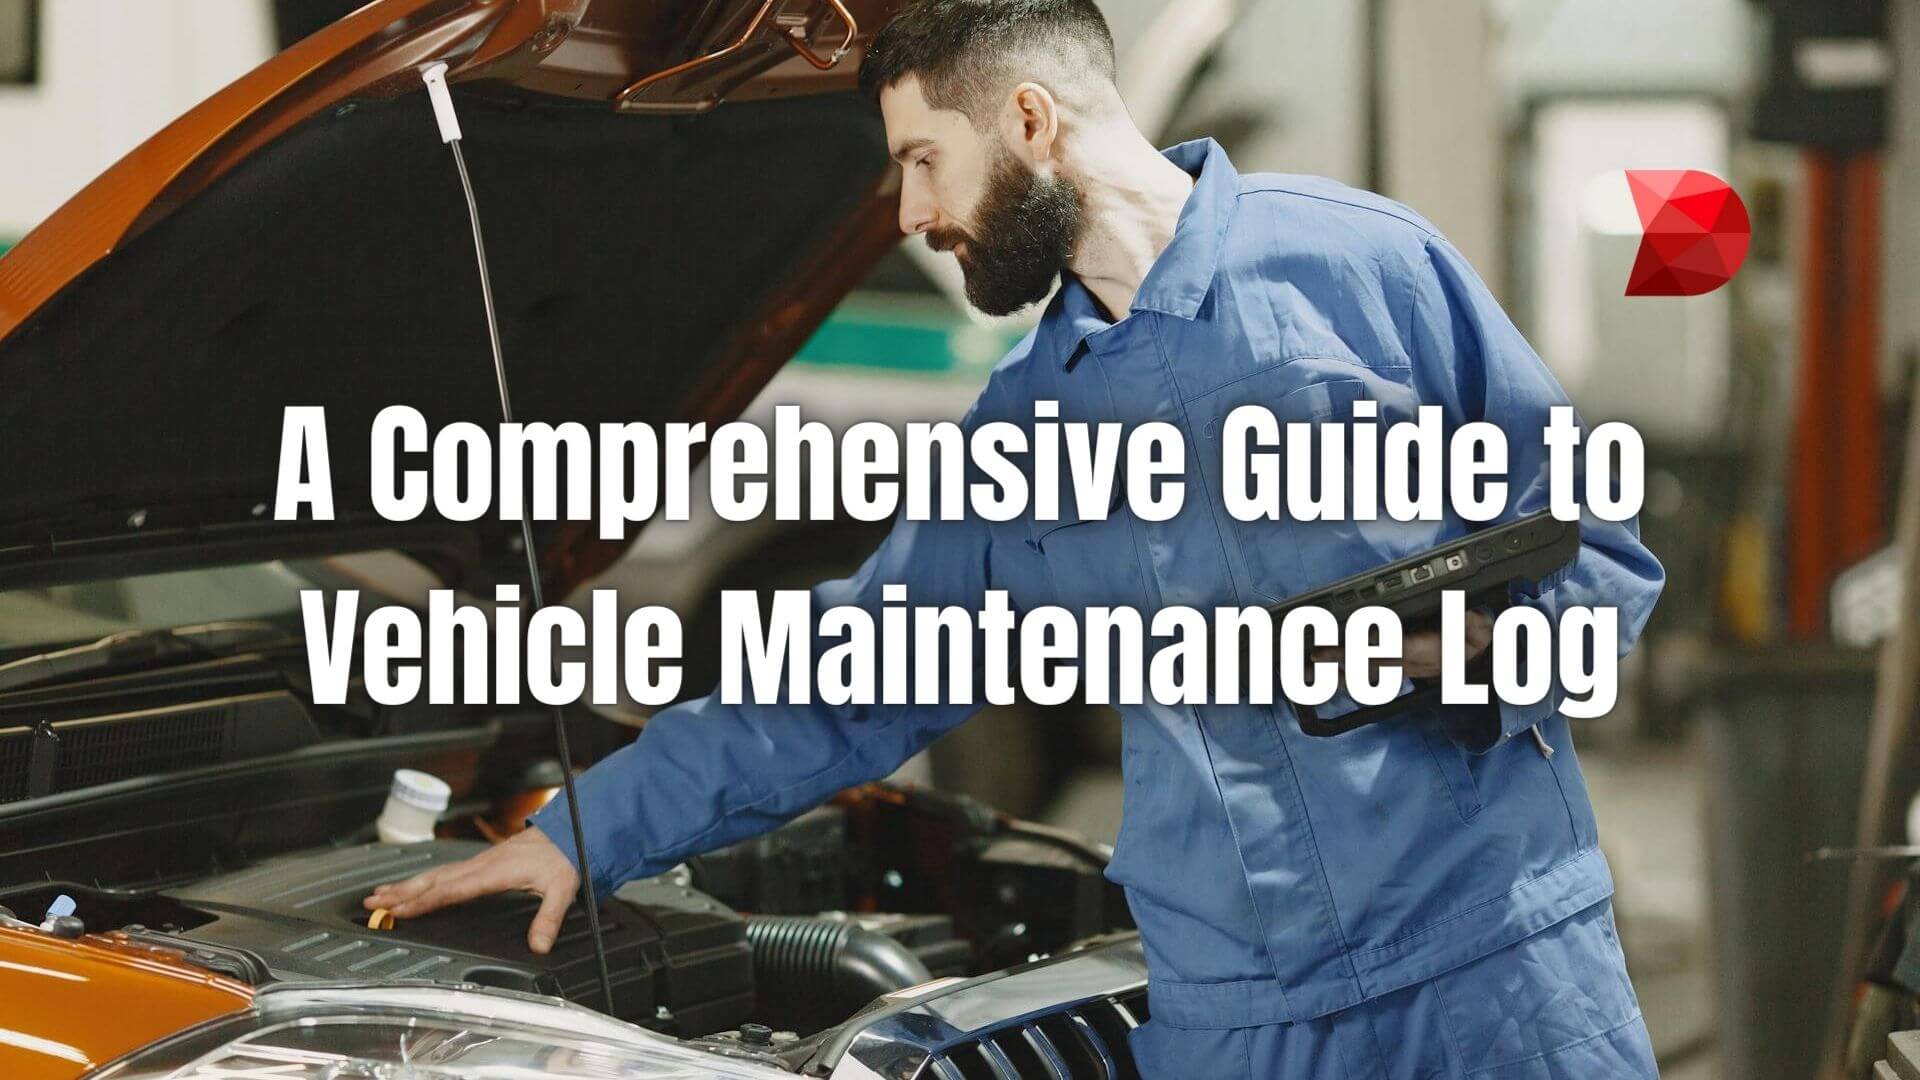 Keep your car running smoothly! Discover the essential steps for maintaining your vehicle with our full guide to vehicle maintenance logs.